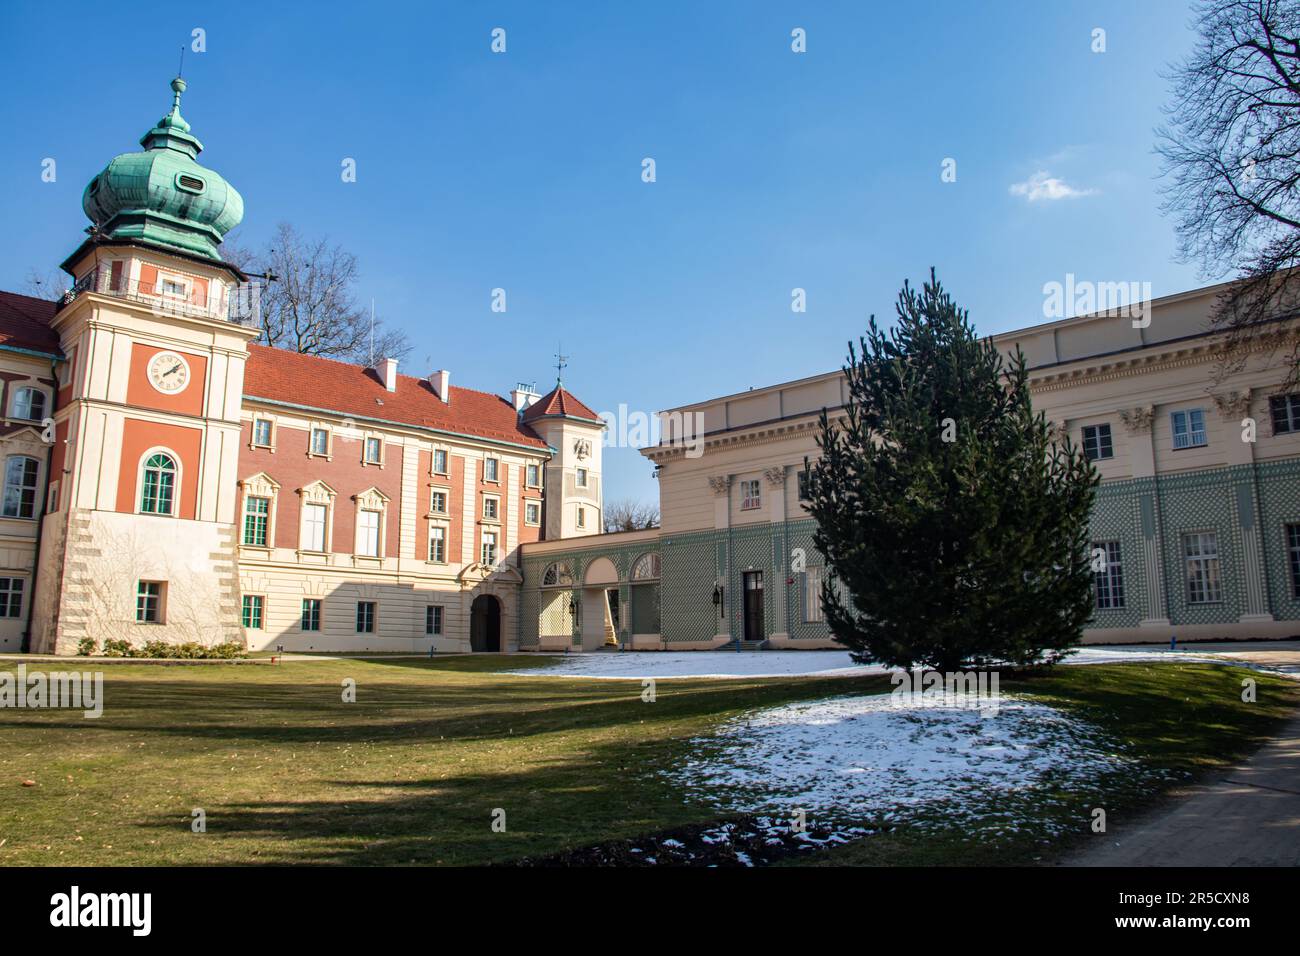 Lancut Castle in Poland is a magnificent historic fortress with rich cultural heritage, featuring stunning architecture and opulent interiors Stock Photo